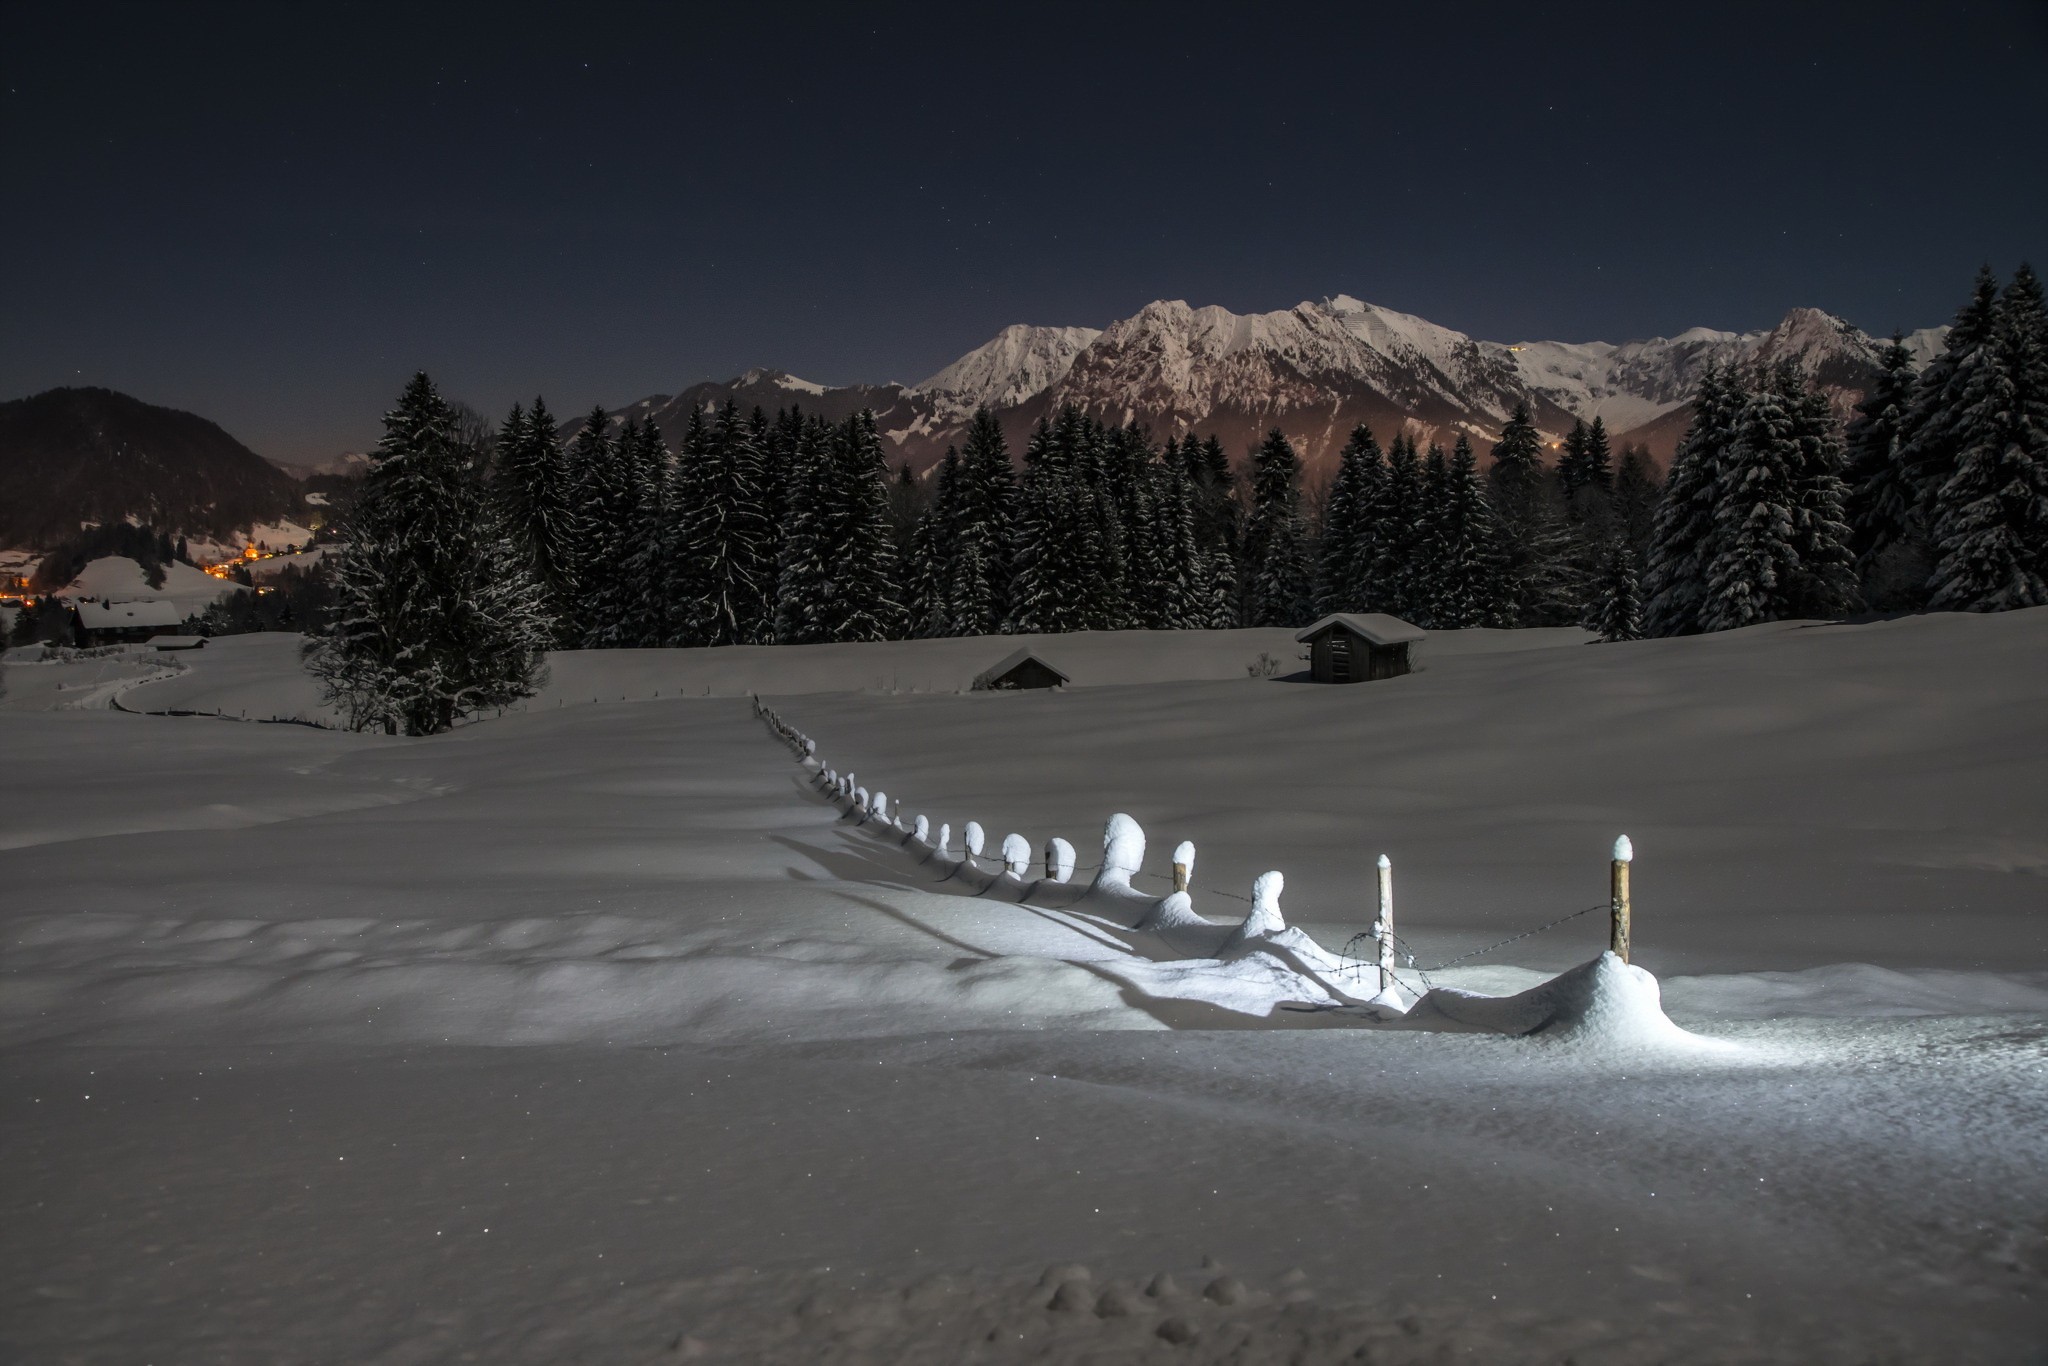 General 2048x1366 night mountains winter landscape nature snow cold outdoors snowy mountain